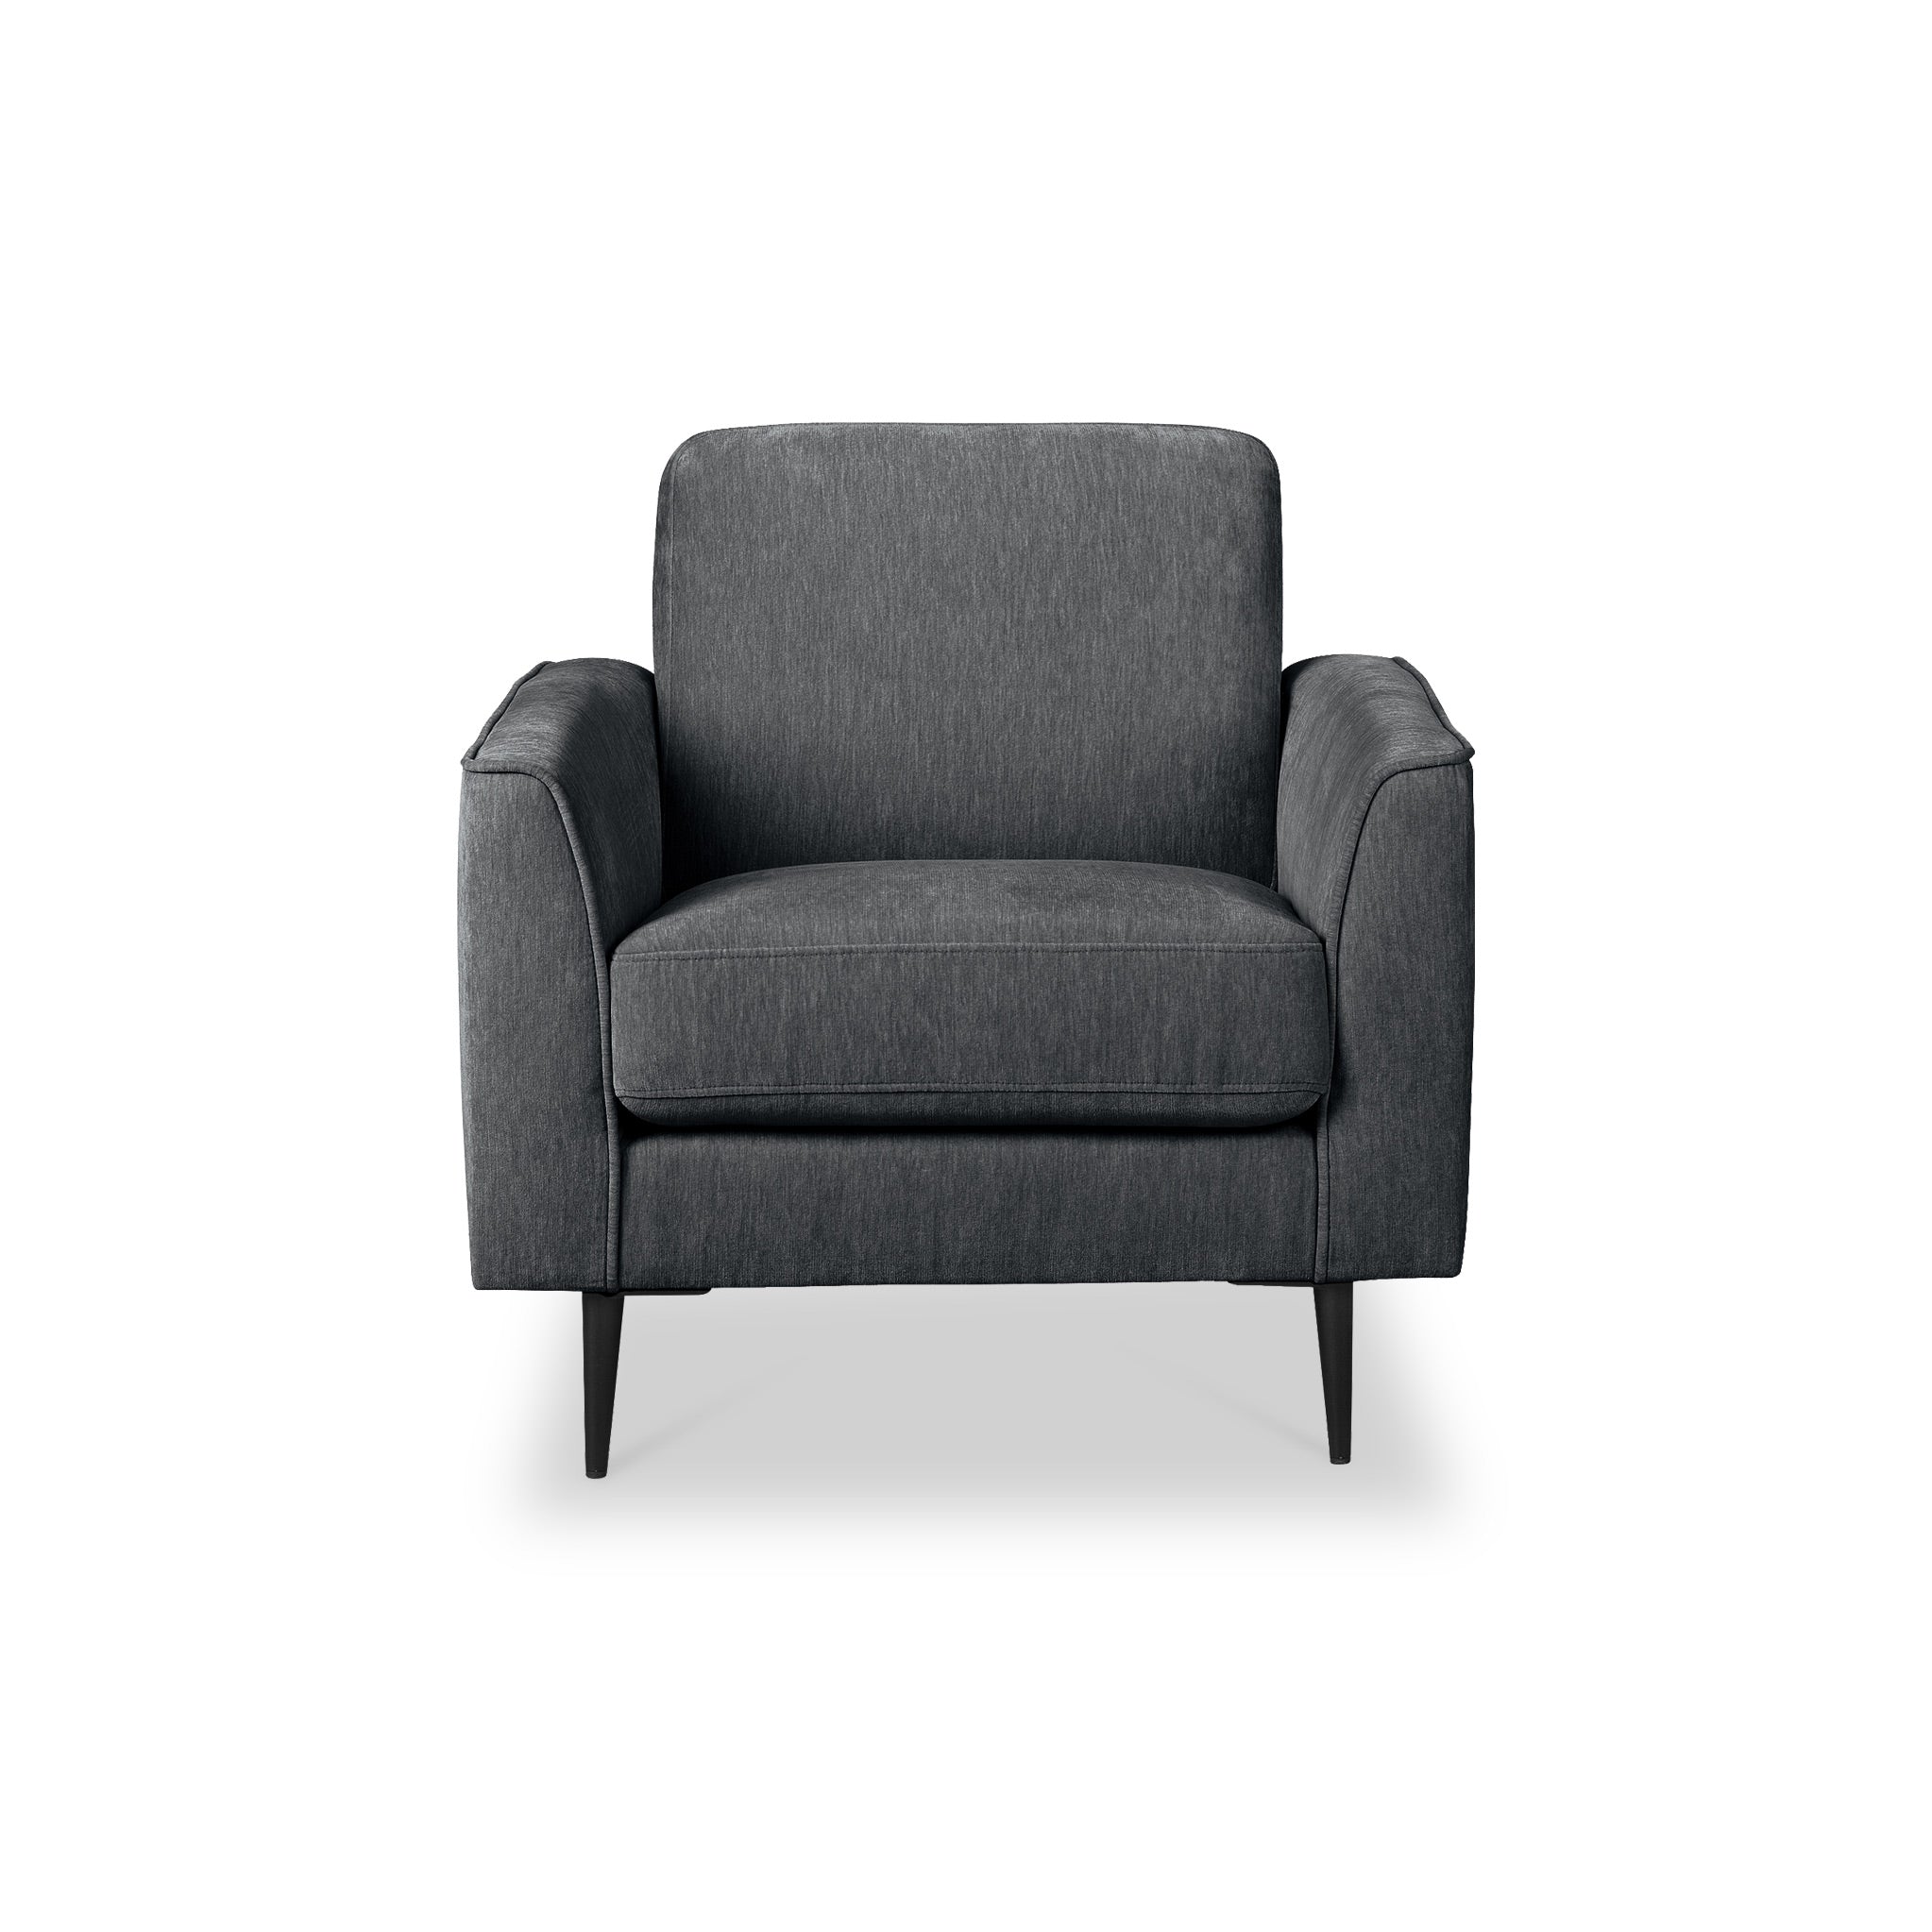 Esme Chenille Armchair Navy Charcoal Mink Fabric Living Room Chair